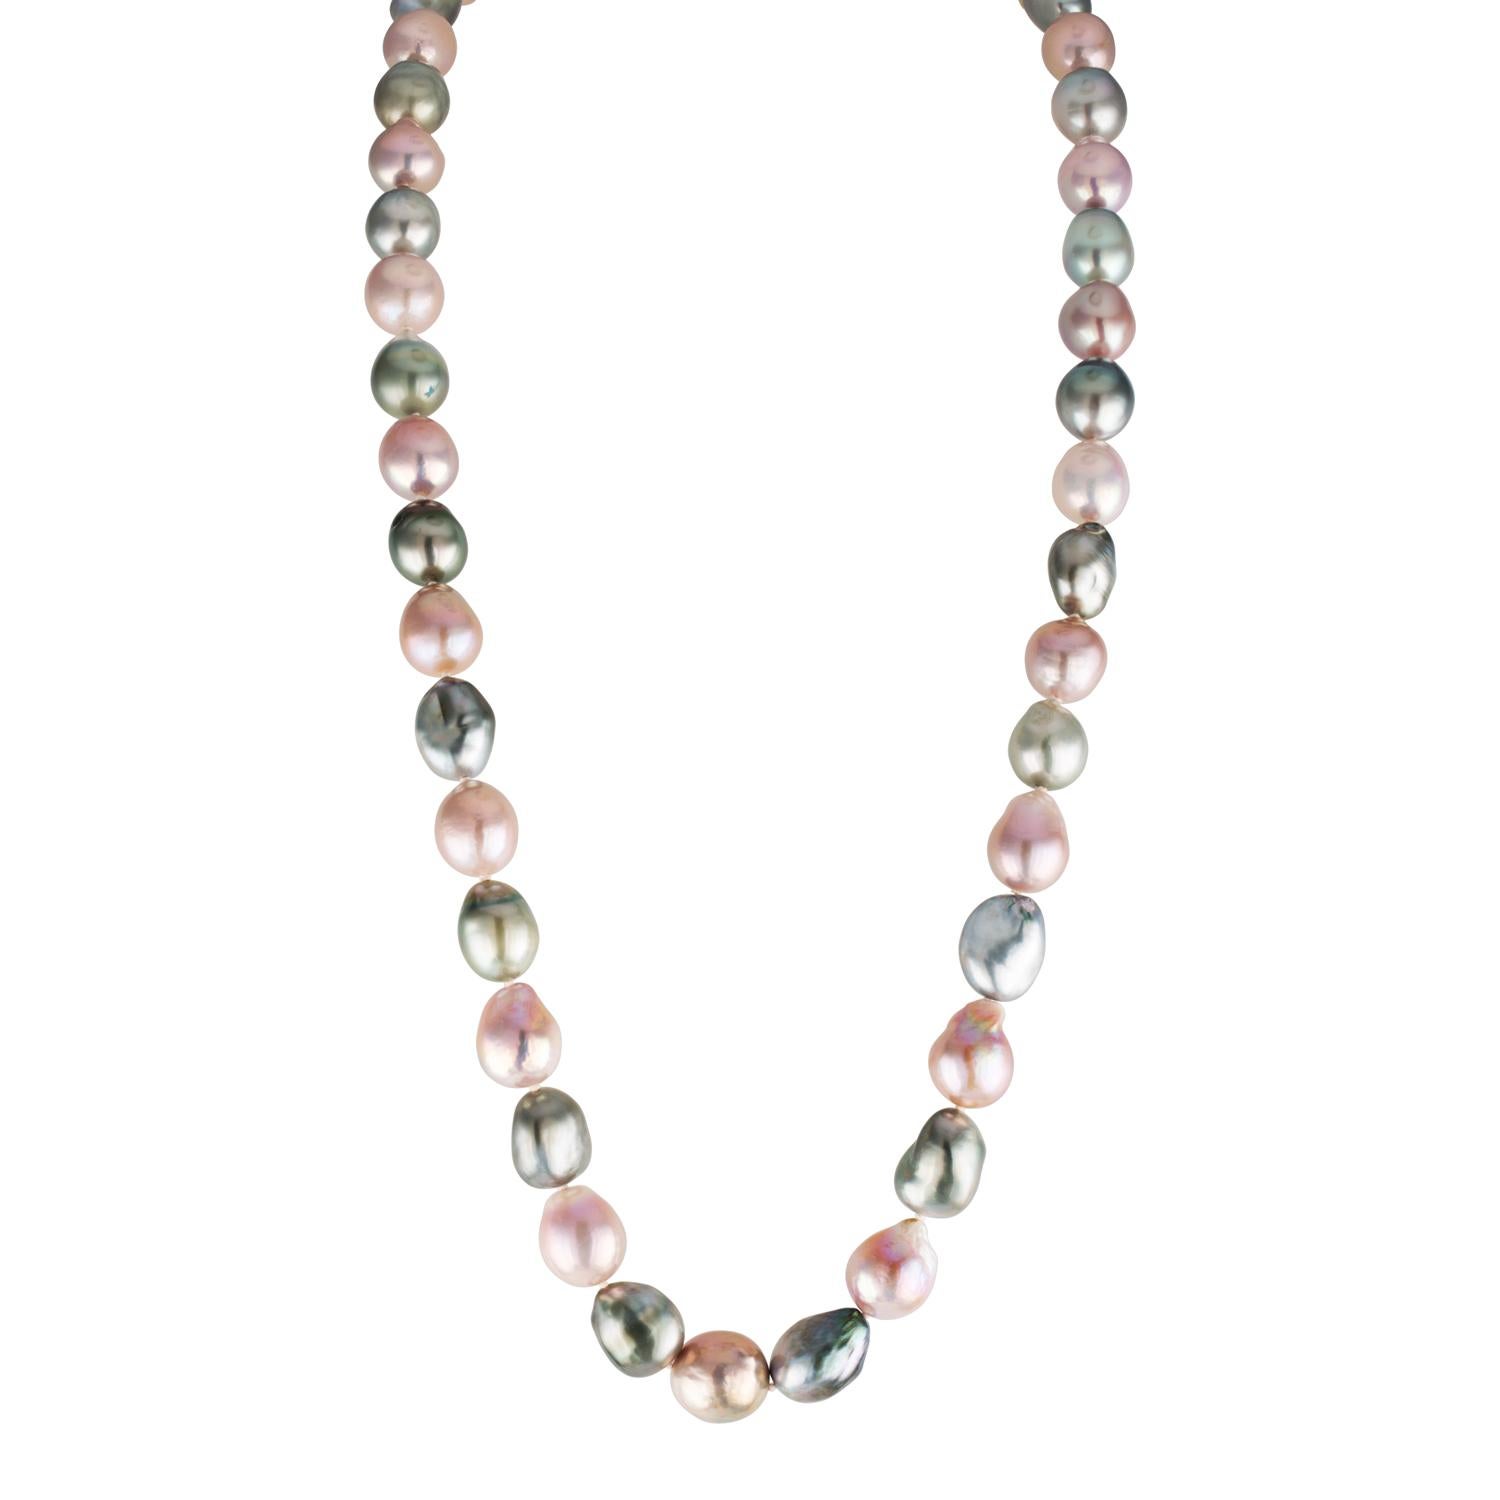 This double length necklace features alternating South Sea Tahitian and Chinese freshwater natural color pink baroque cultured pearls. This striking collection of pearls can rarely be found at such quality.
The pearls measure 14x16mm and are strung